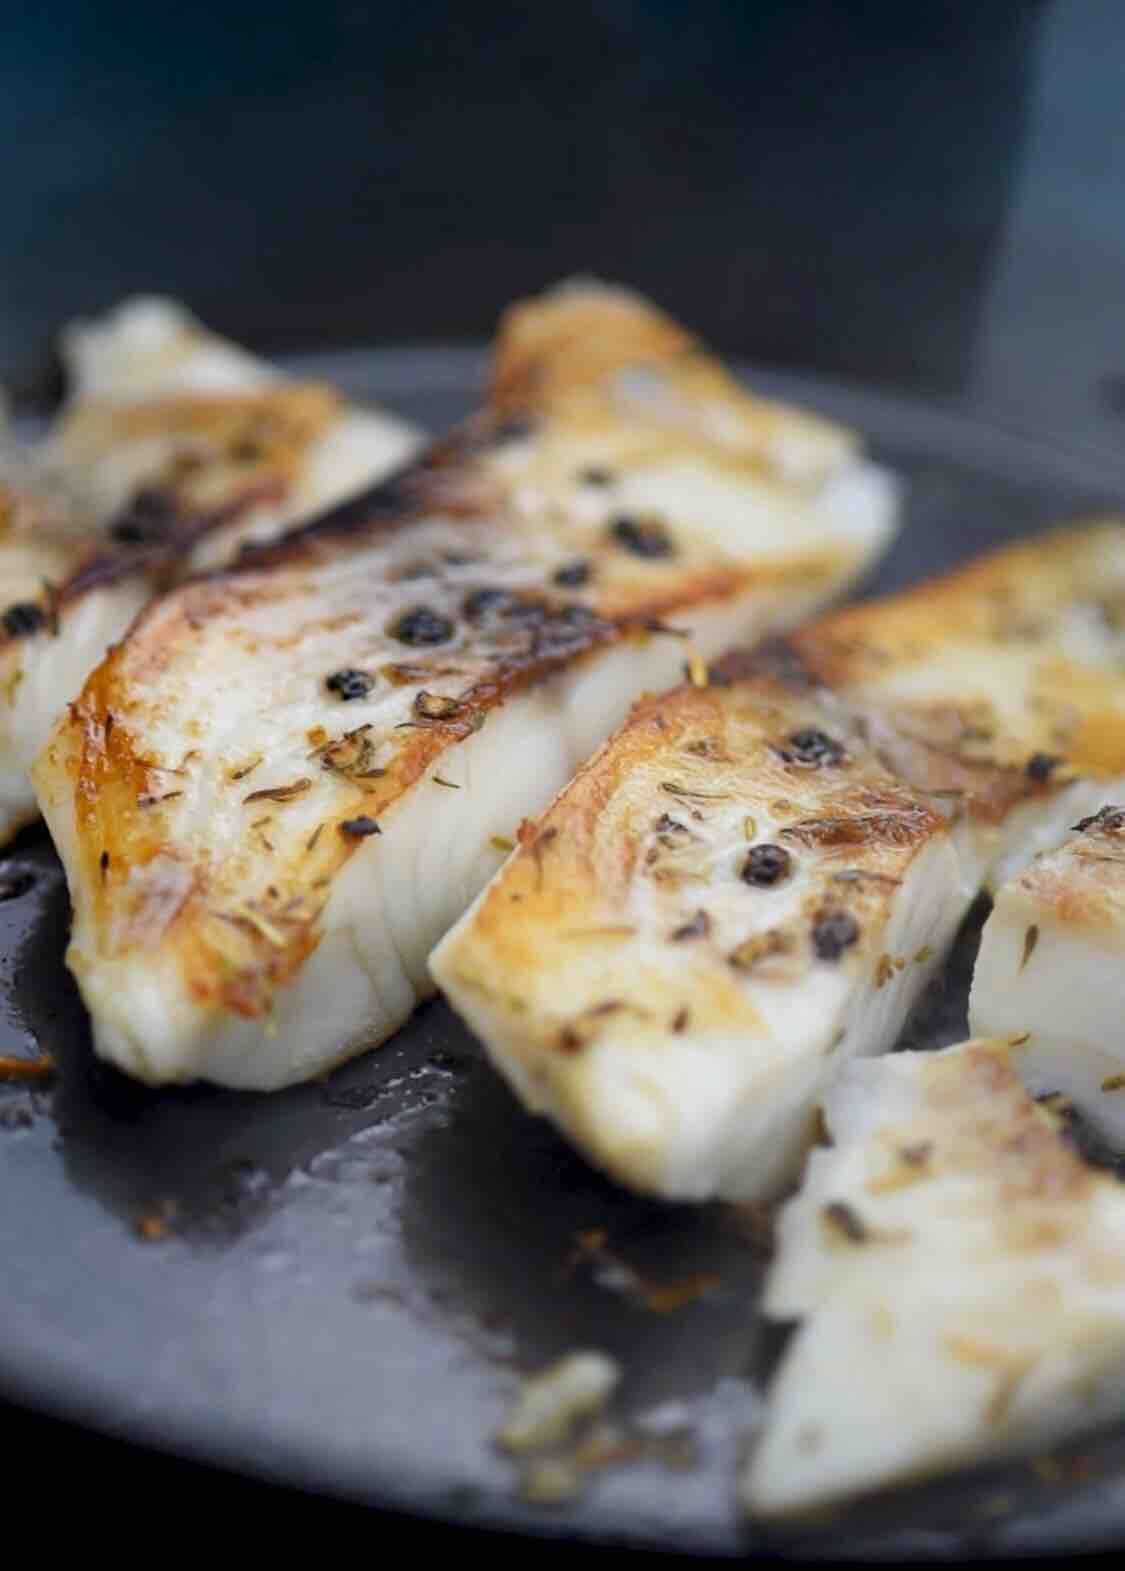 Pan-fried Sea Bream with Endless Aftertaste recipe